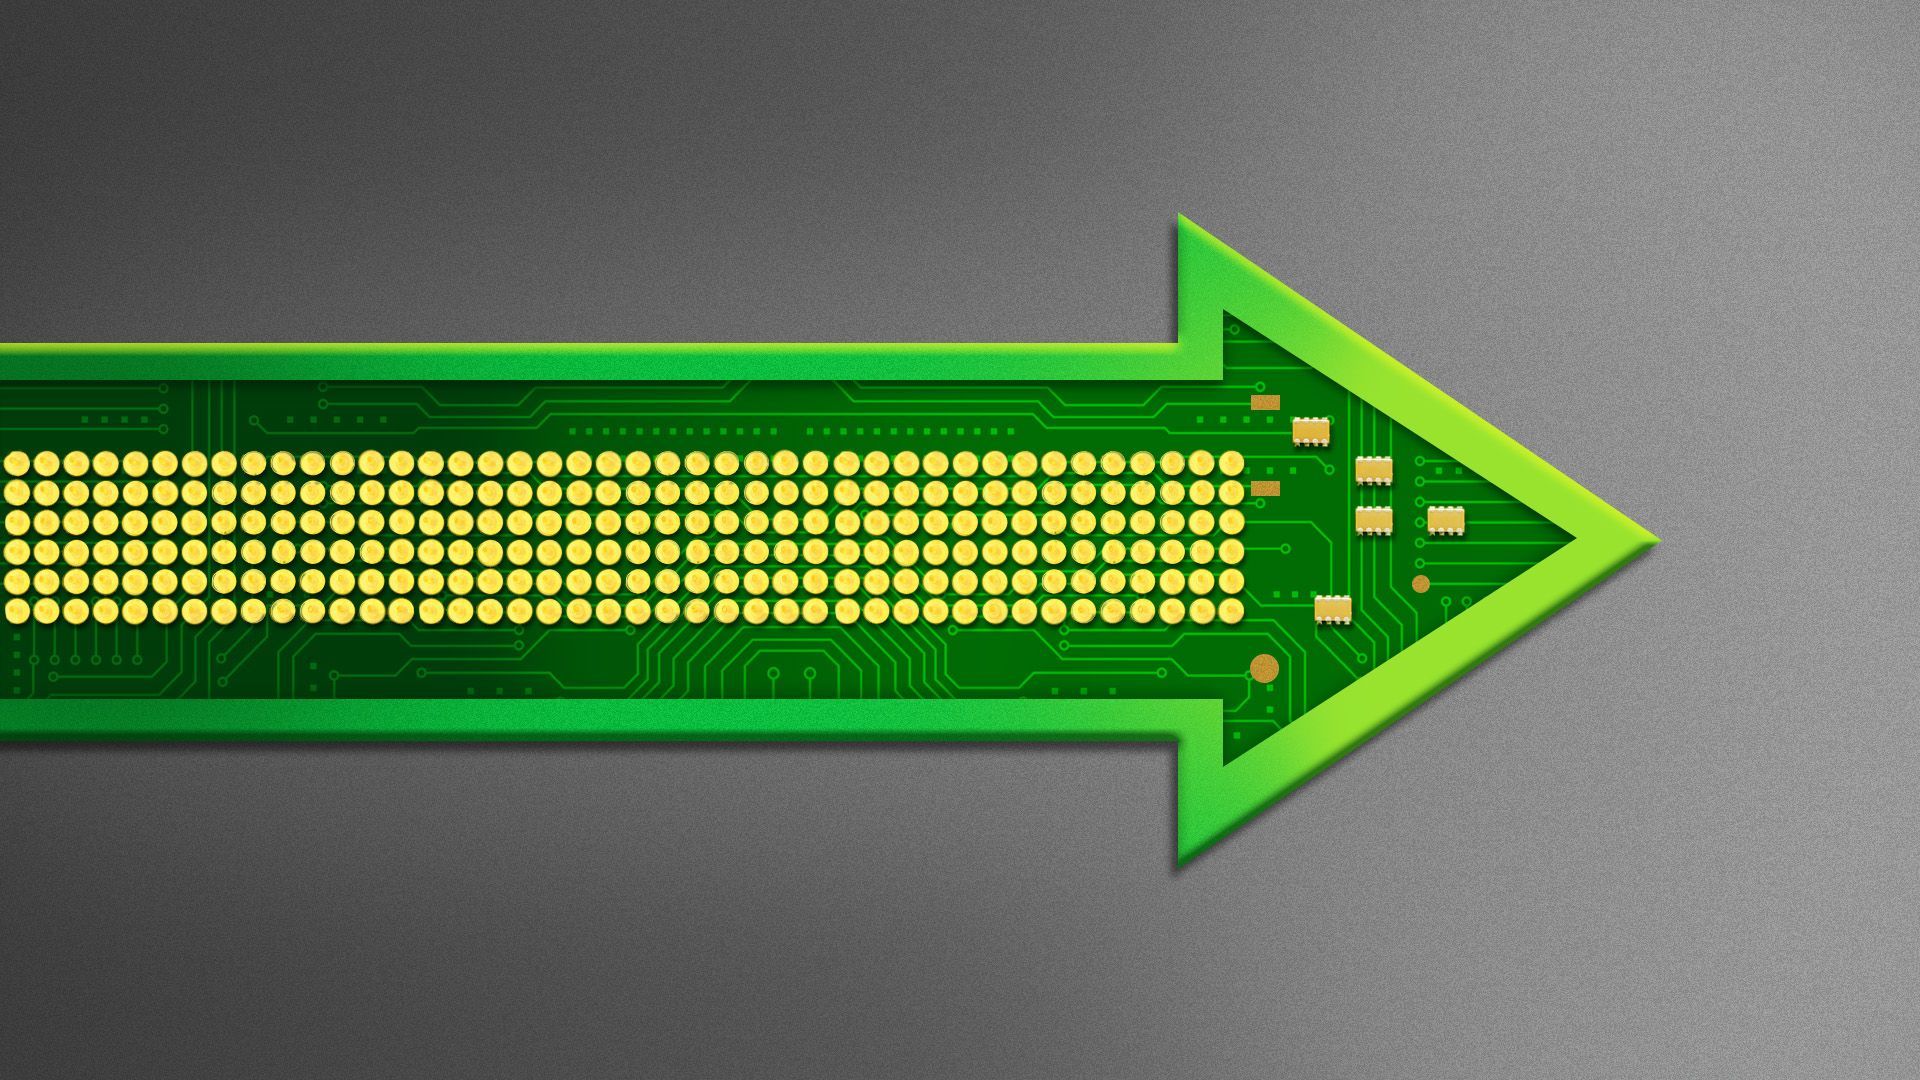 Illustration of a microchip in the shape of a long arrow